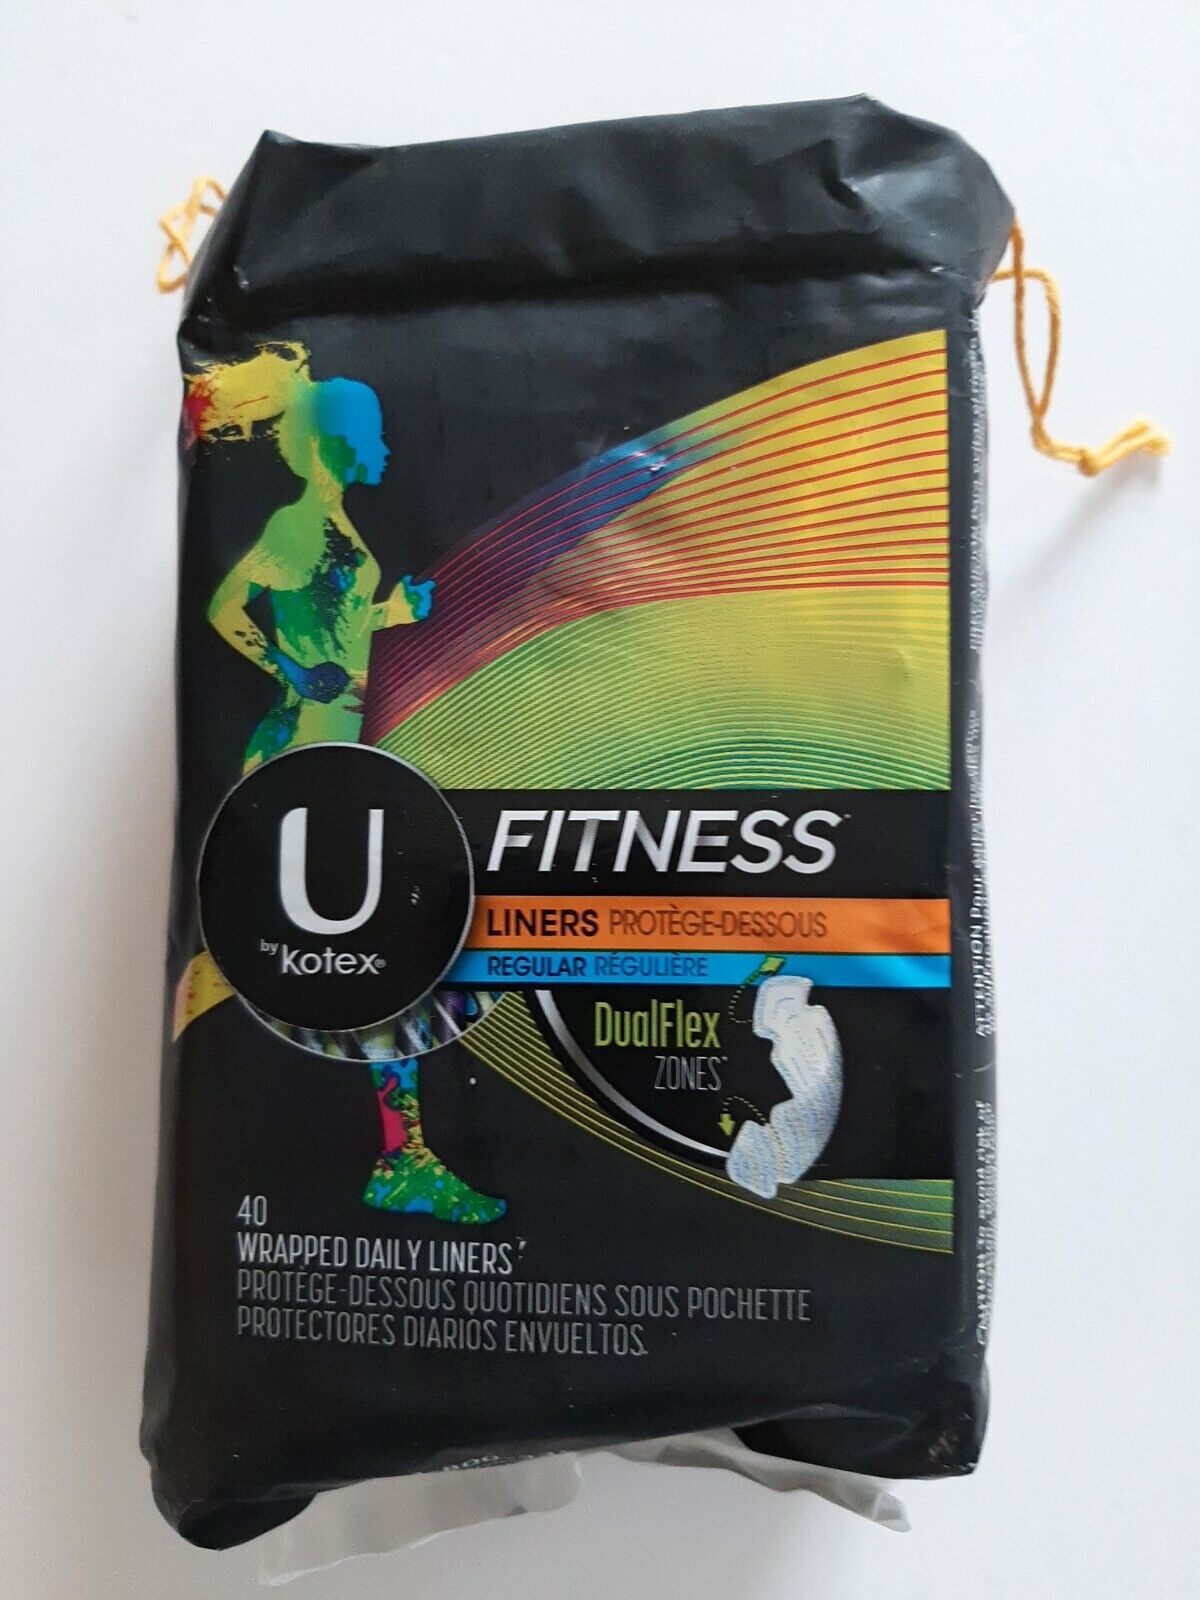 New In Package U By Kotex Fitness Wrapped Daily Liners 40 Ct Regular Dual Flex